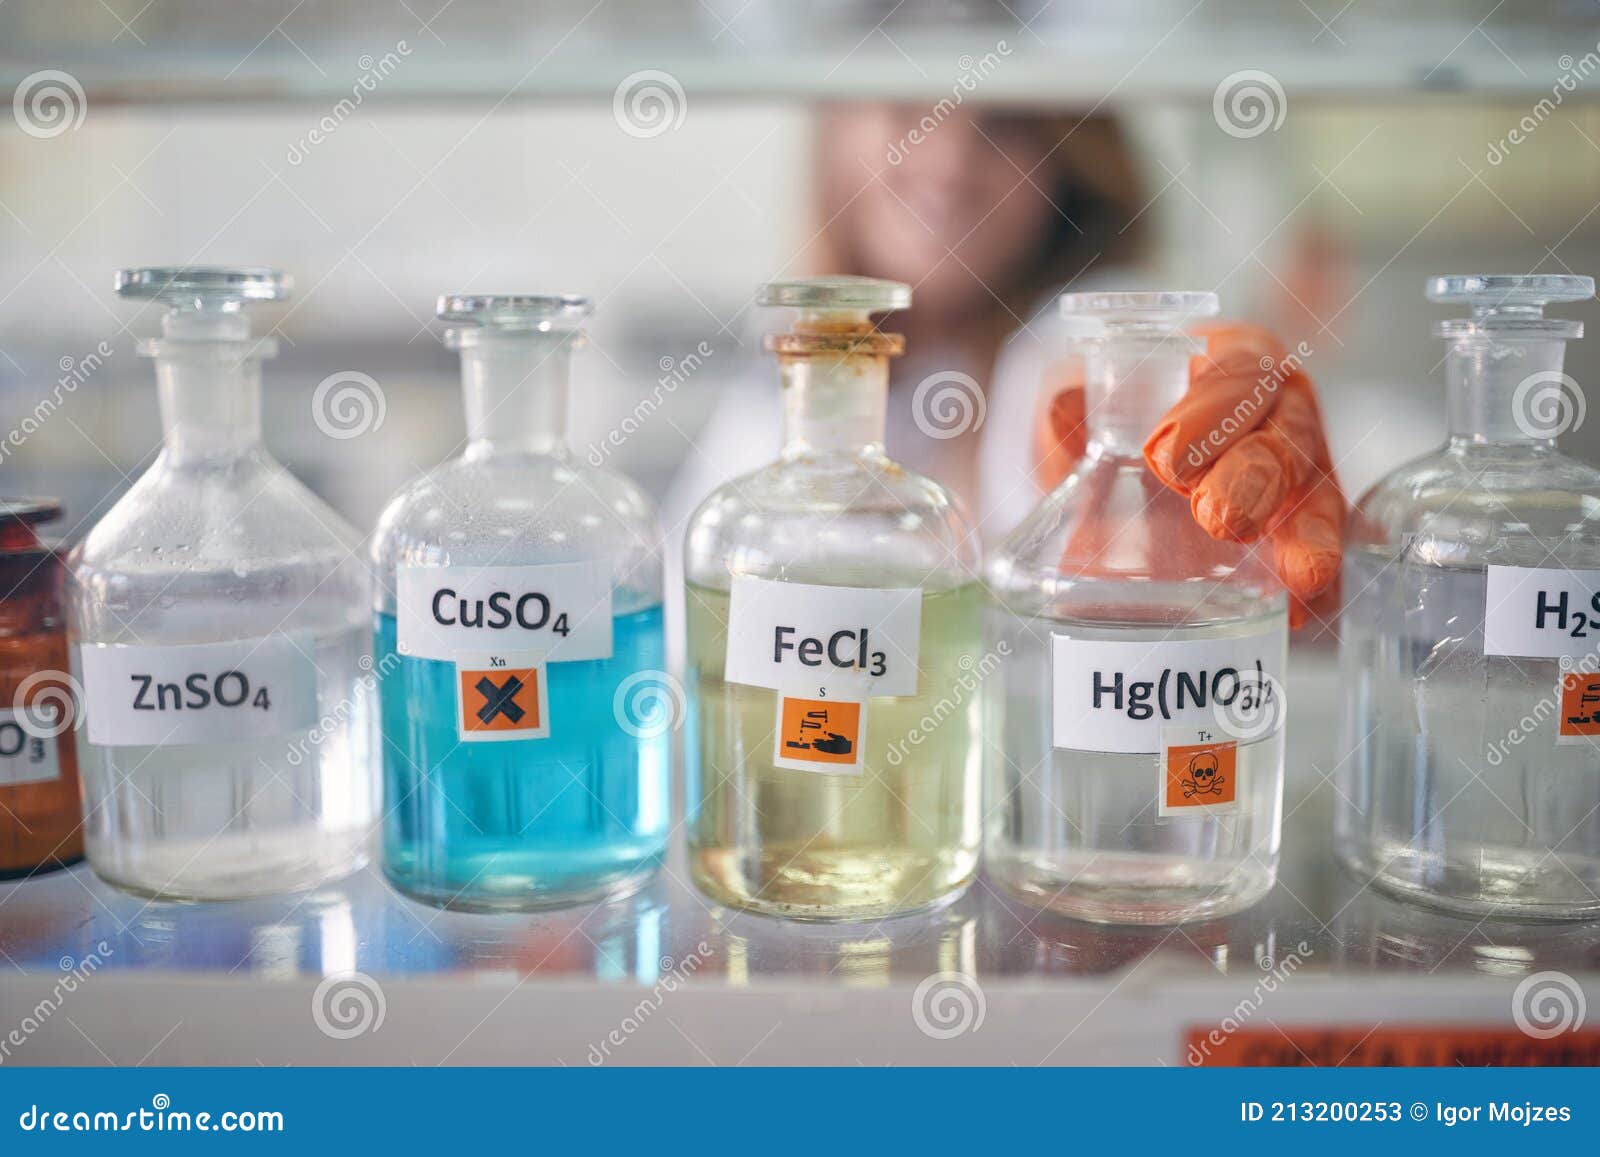 an institution employee handling bottles with chemicals in the laboratory. chemistry, chemicals, lab